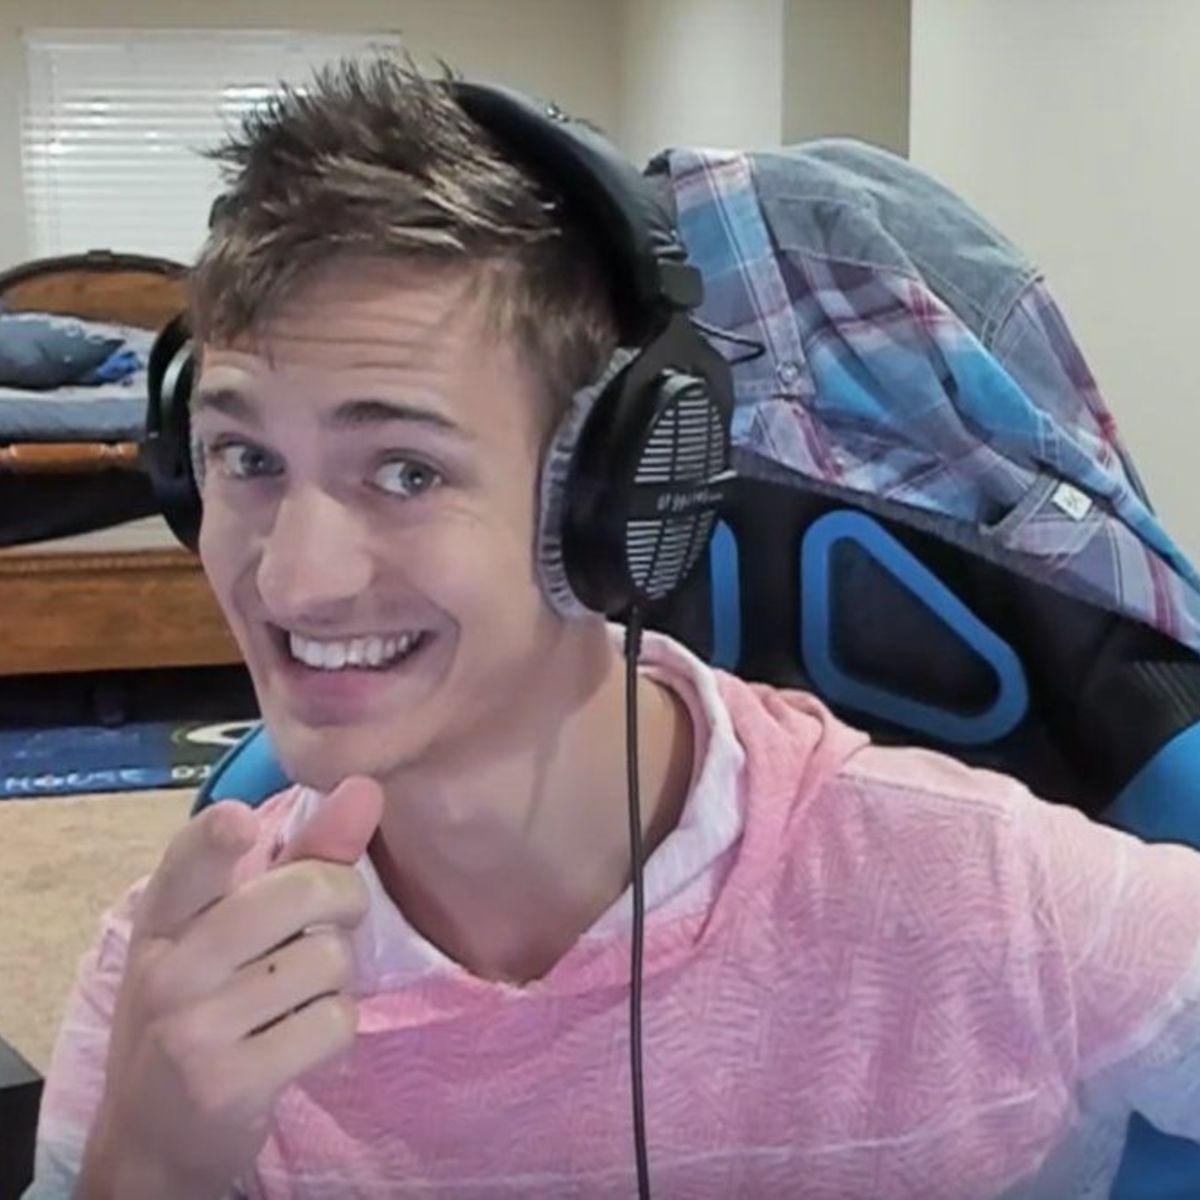 Ninja Explains Why He Doesn’t Play With Women on Stream